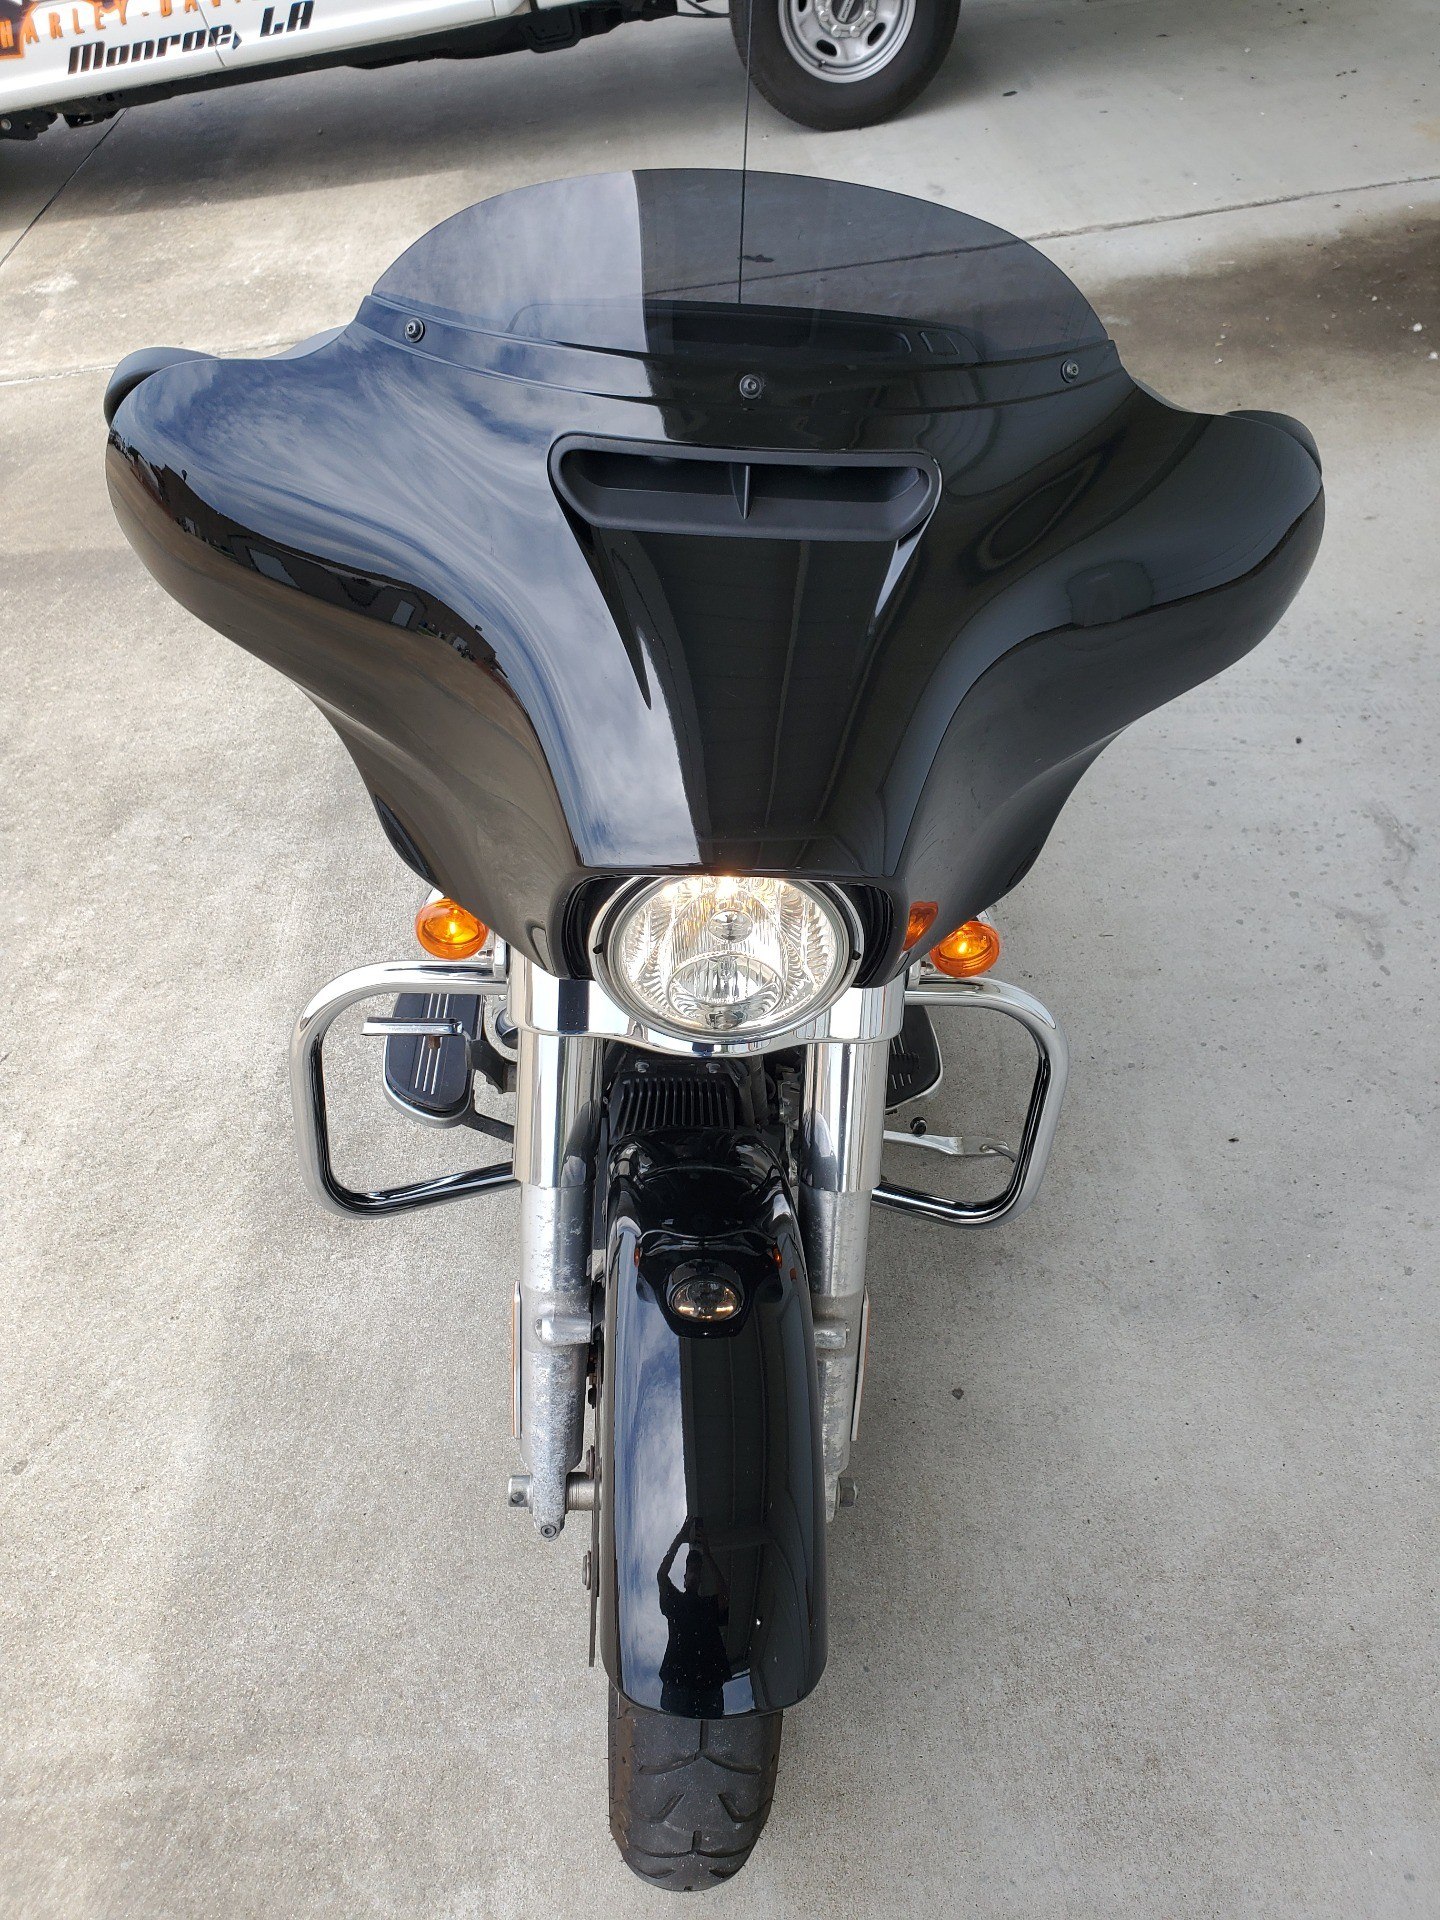 used harley street glide for sale near me